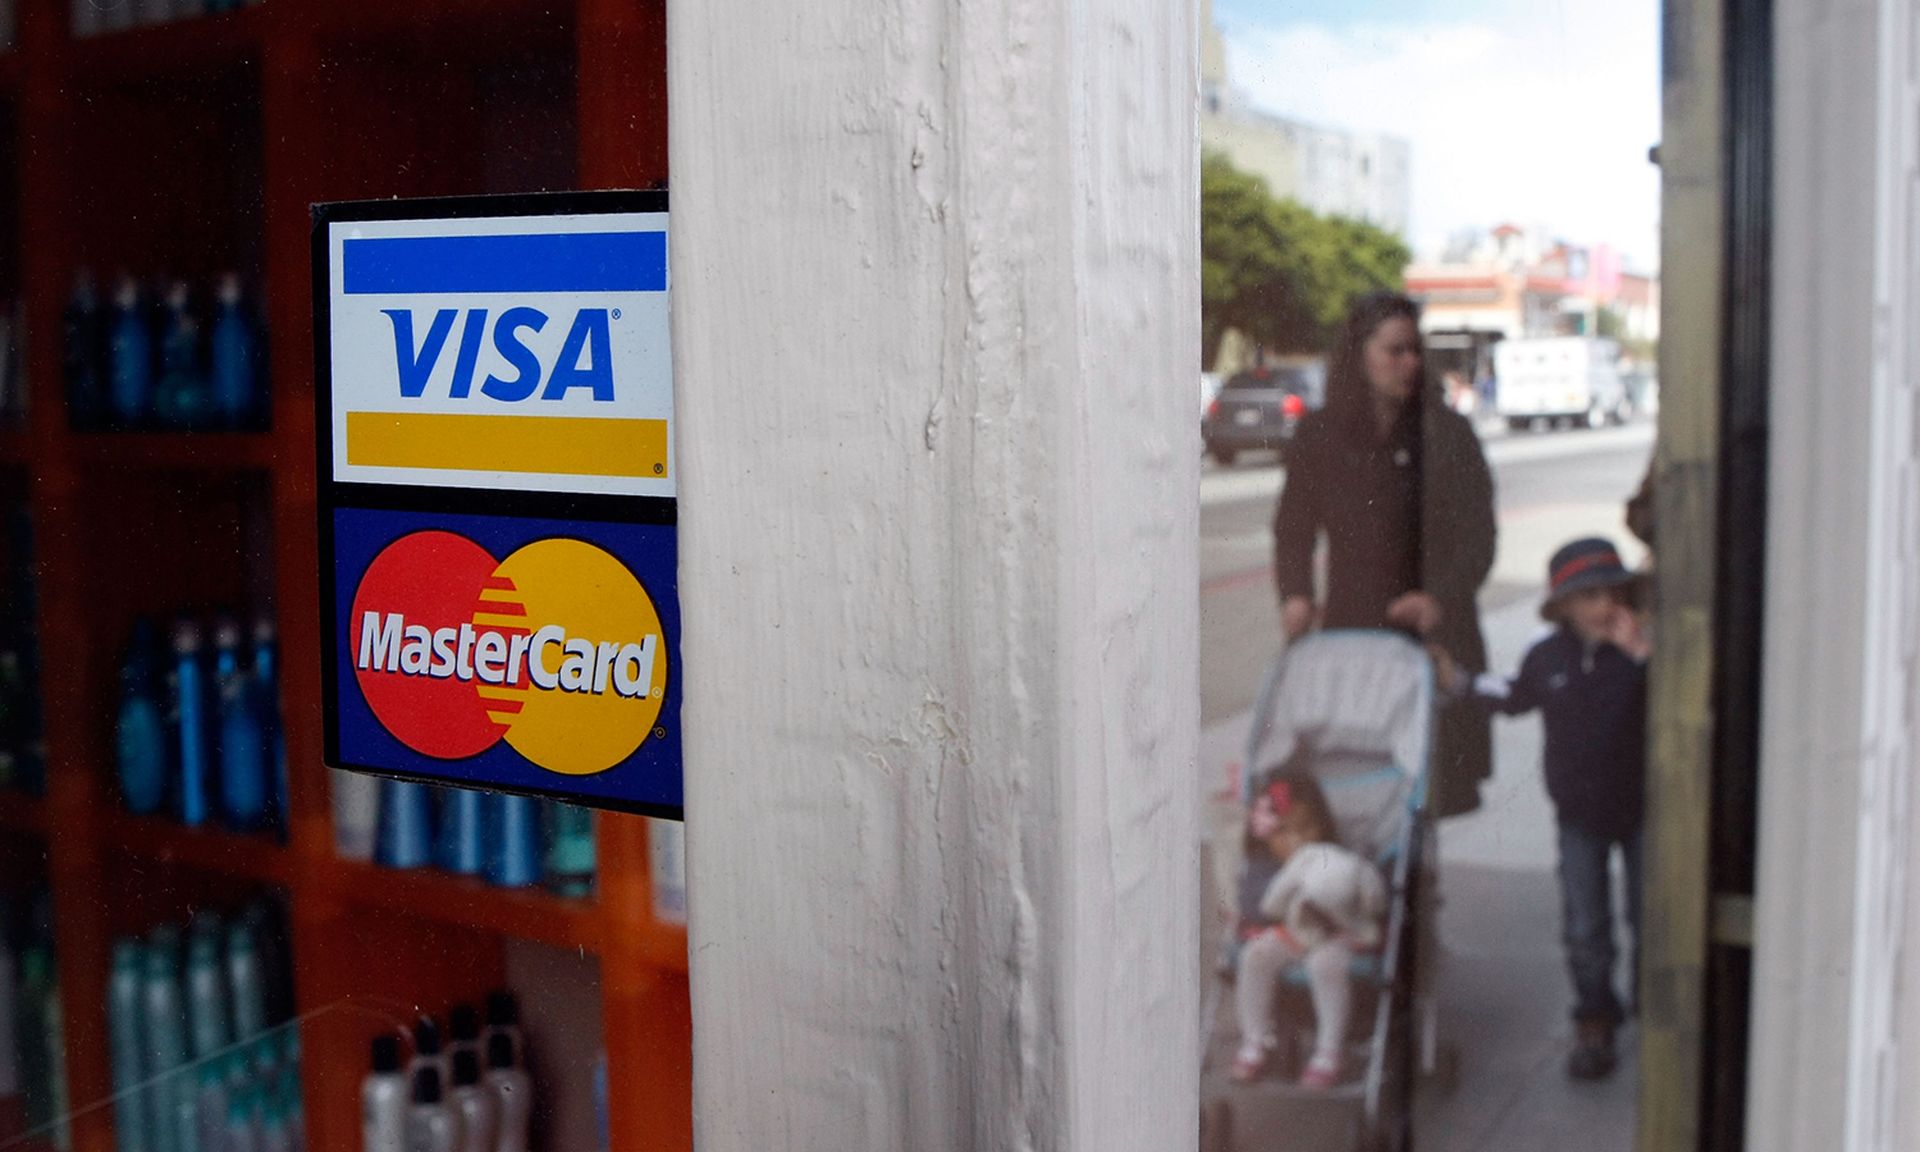 People walk by a window sticker advertising Visa and Mastercard credit cards Feb. 25, 2008, in San Francisco. (Justin Sullivan/Getty Images)